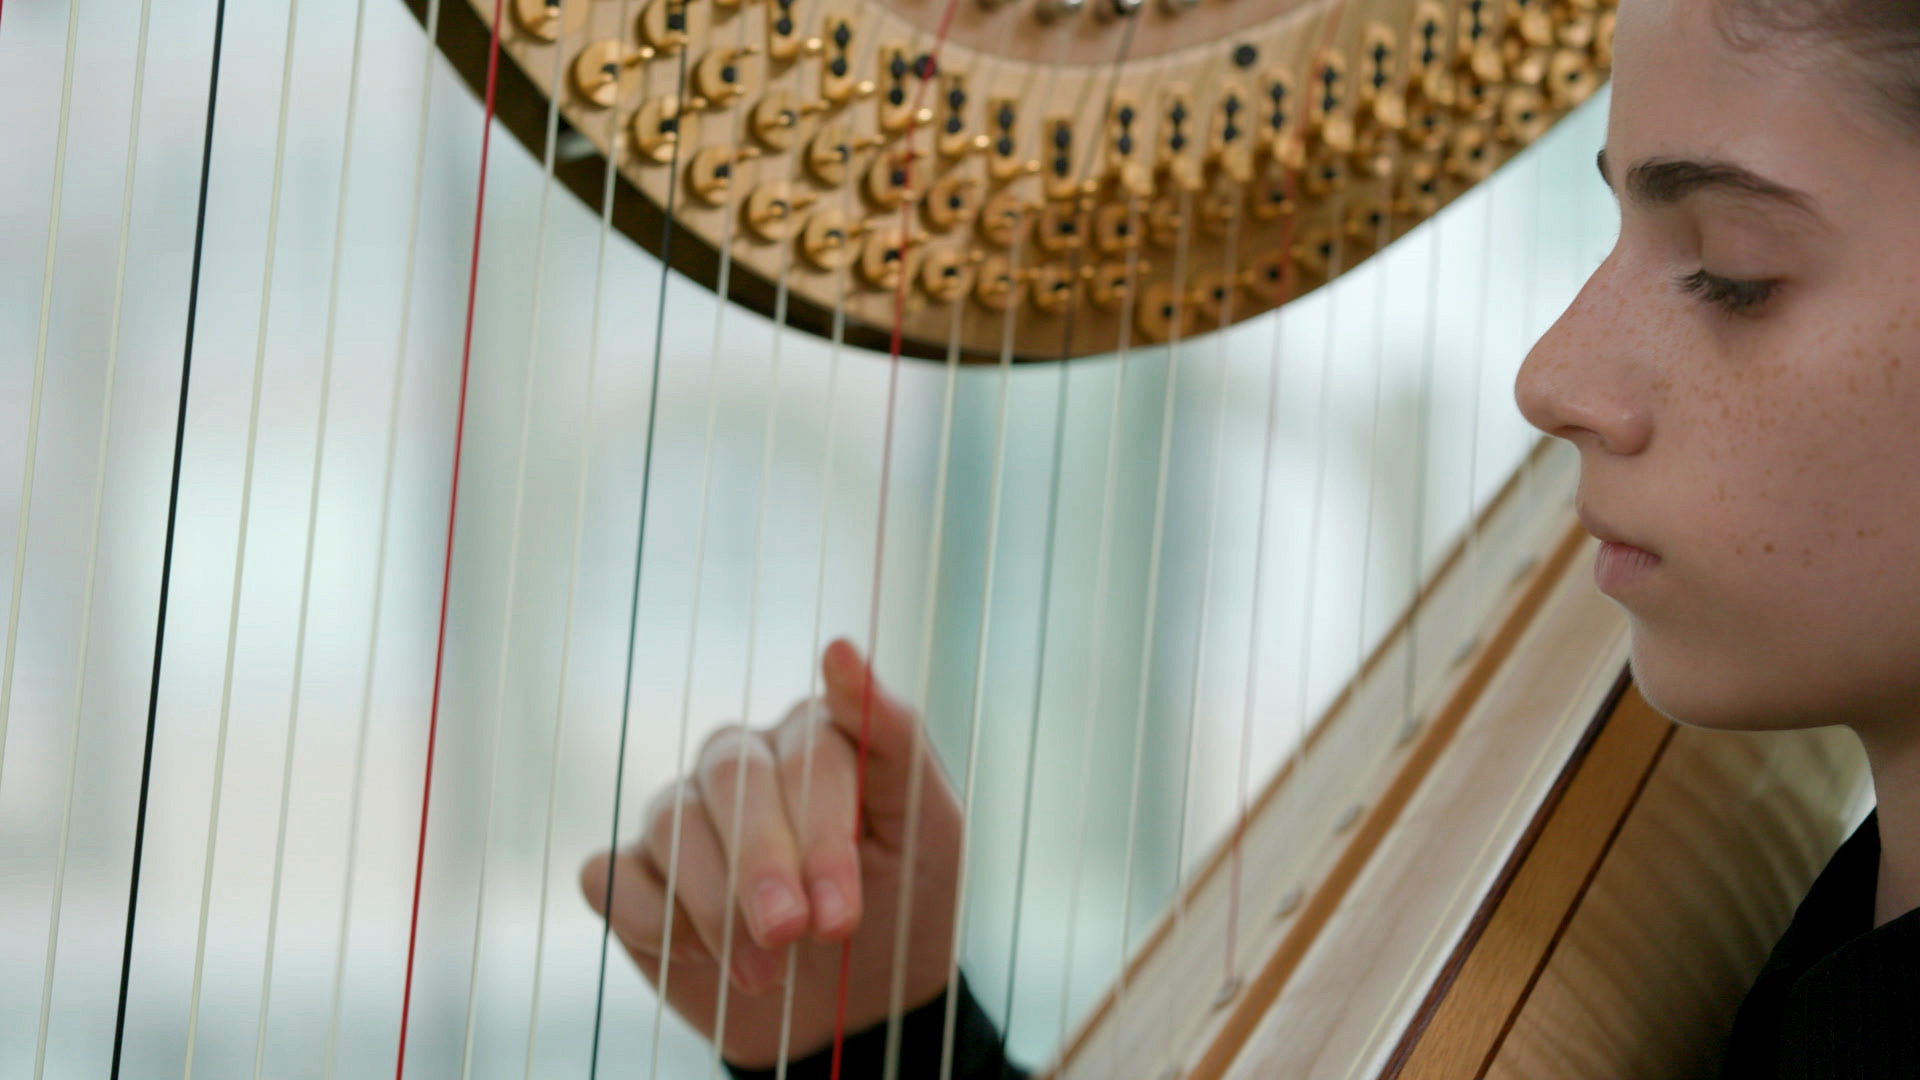 A young person playing harp in a cinematic still image